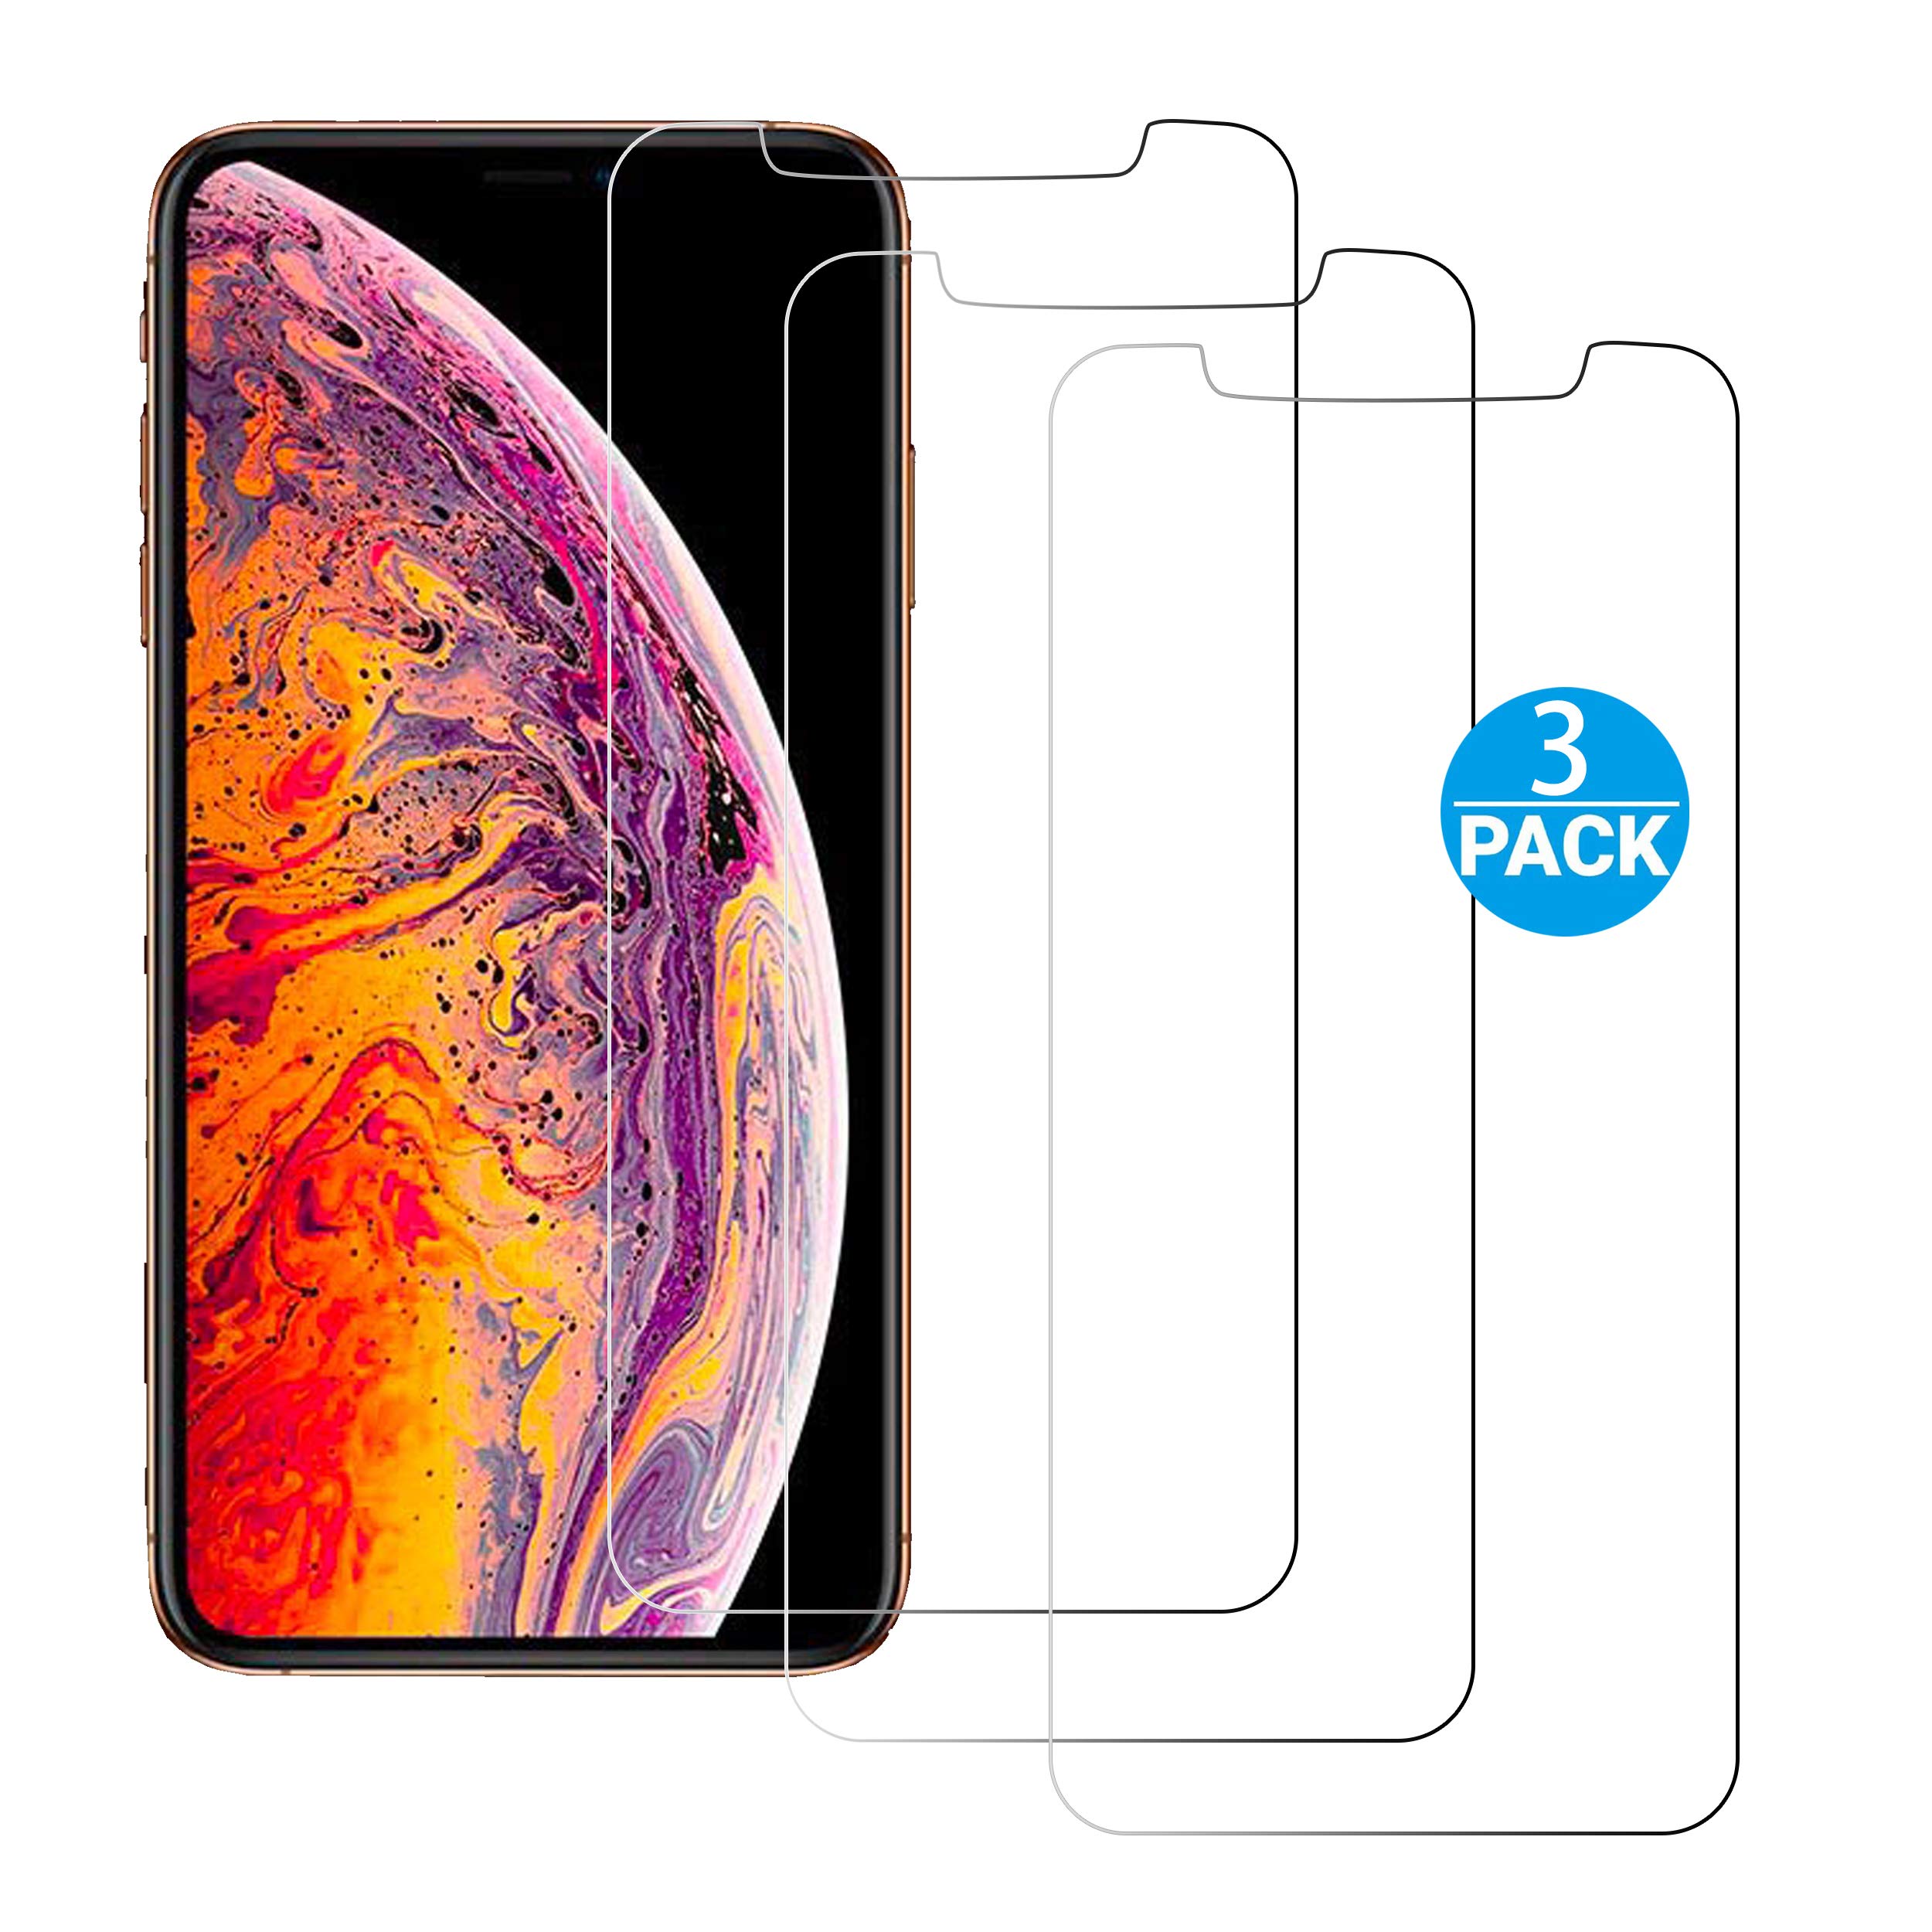 Ailun for Apple iPhone 11 Pro/ Xs/ X Screen Protector,3 Pack,5.8 Inch Display,Tempered Glass 2.5D Edge Work Most Case[NOT for iPhone 11,6.1 inch]